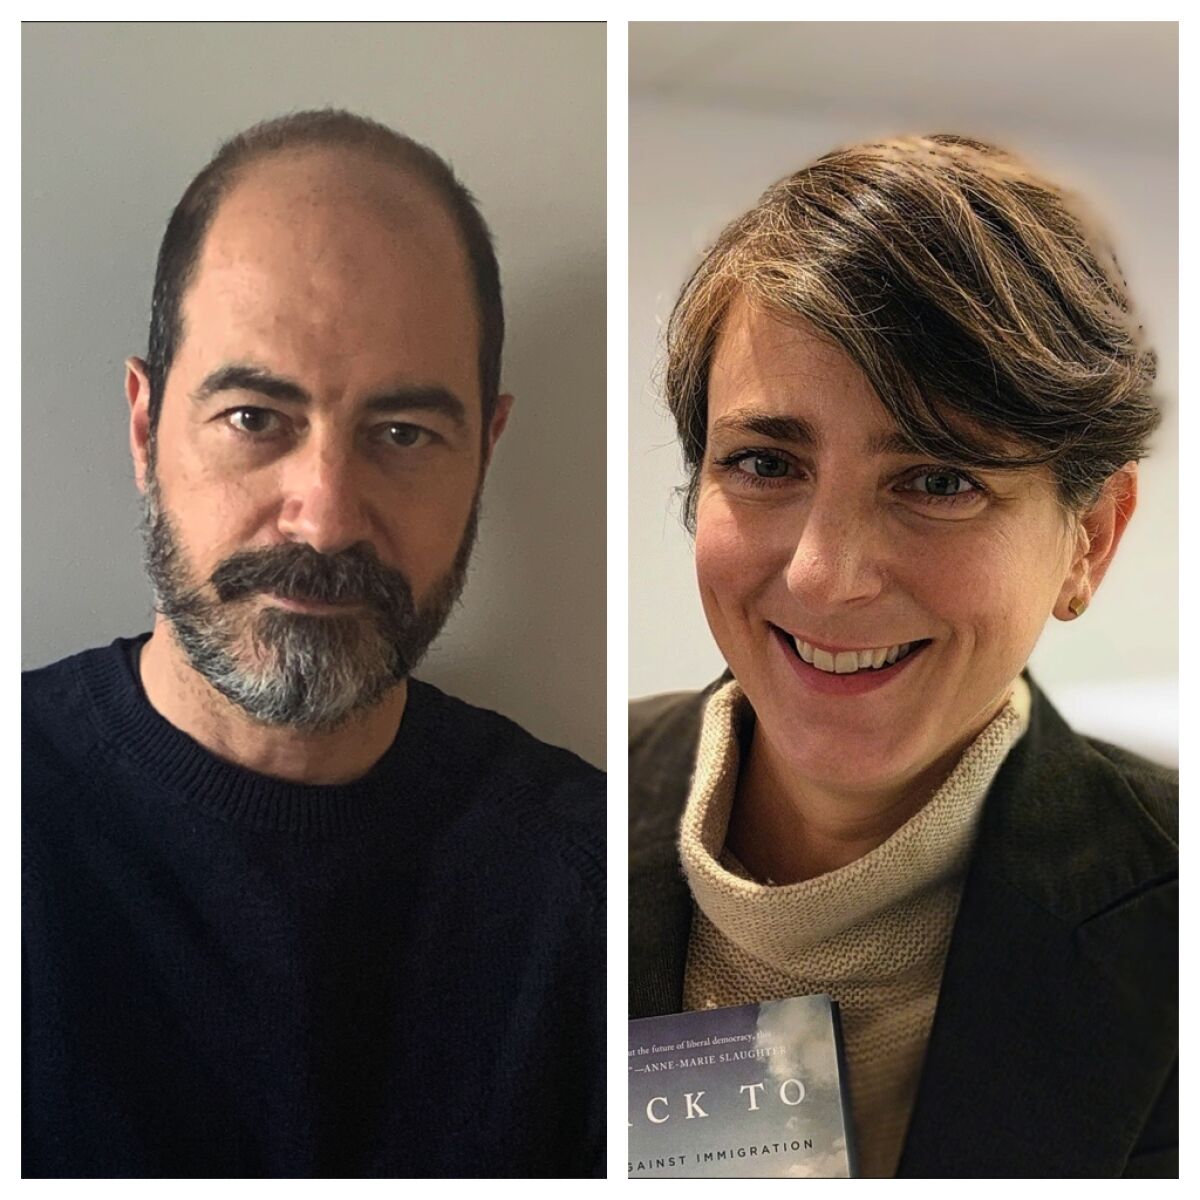 Astra Publishing House will be led by publisher and COO Ben Schrank(left) and editorial director Alessandra Bastagli.